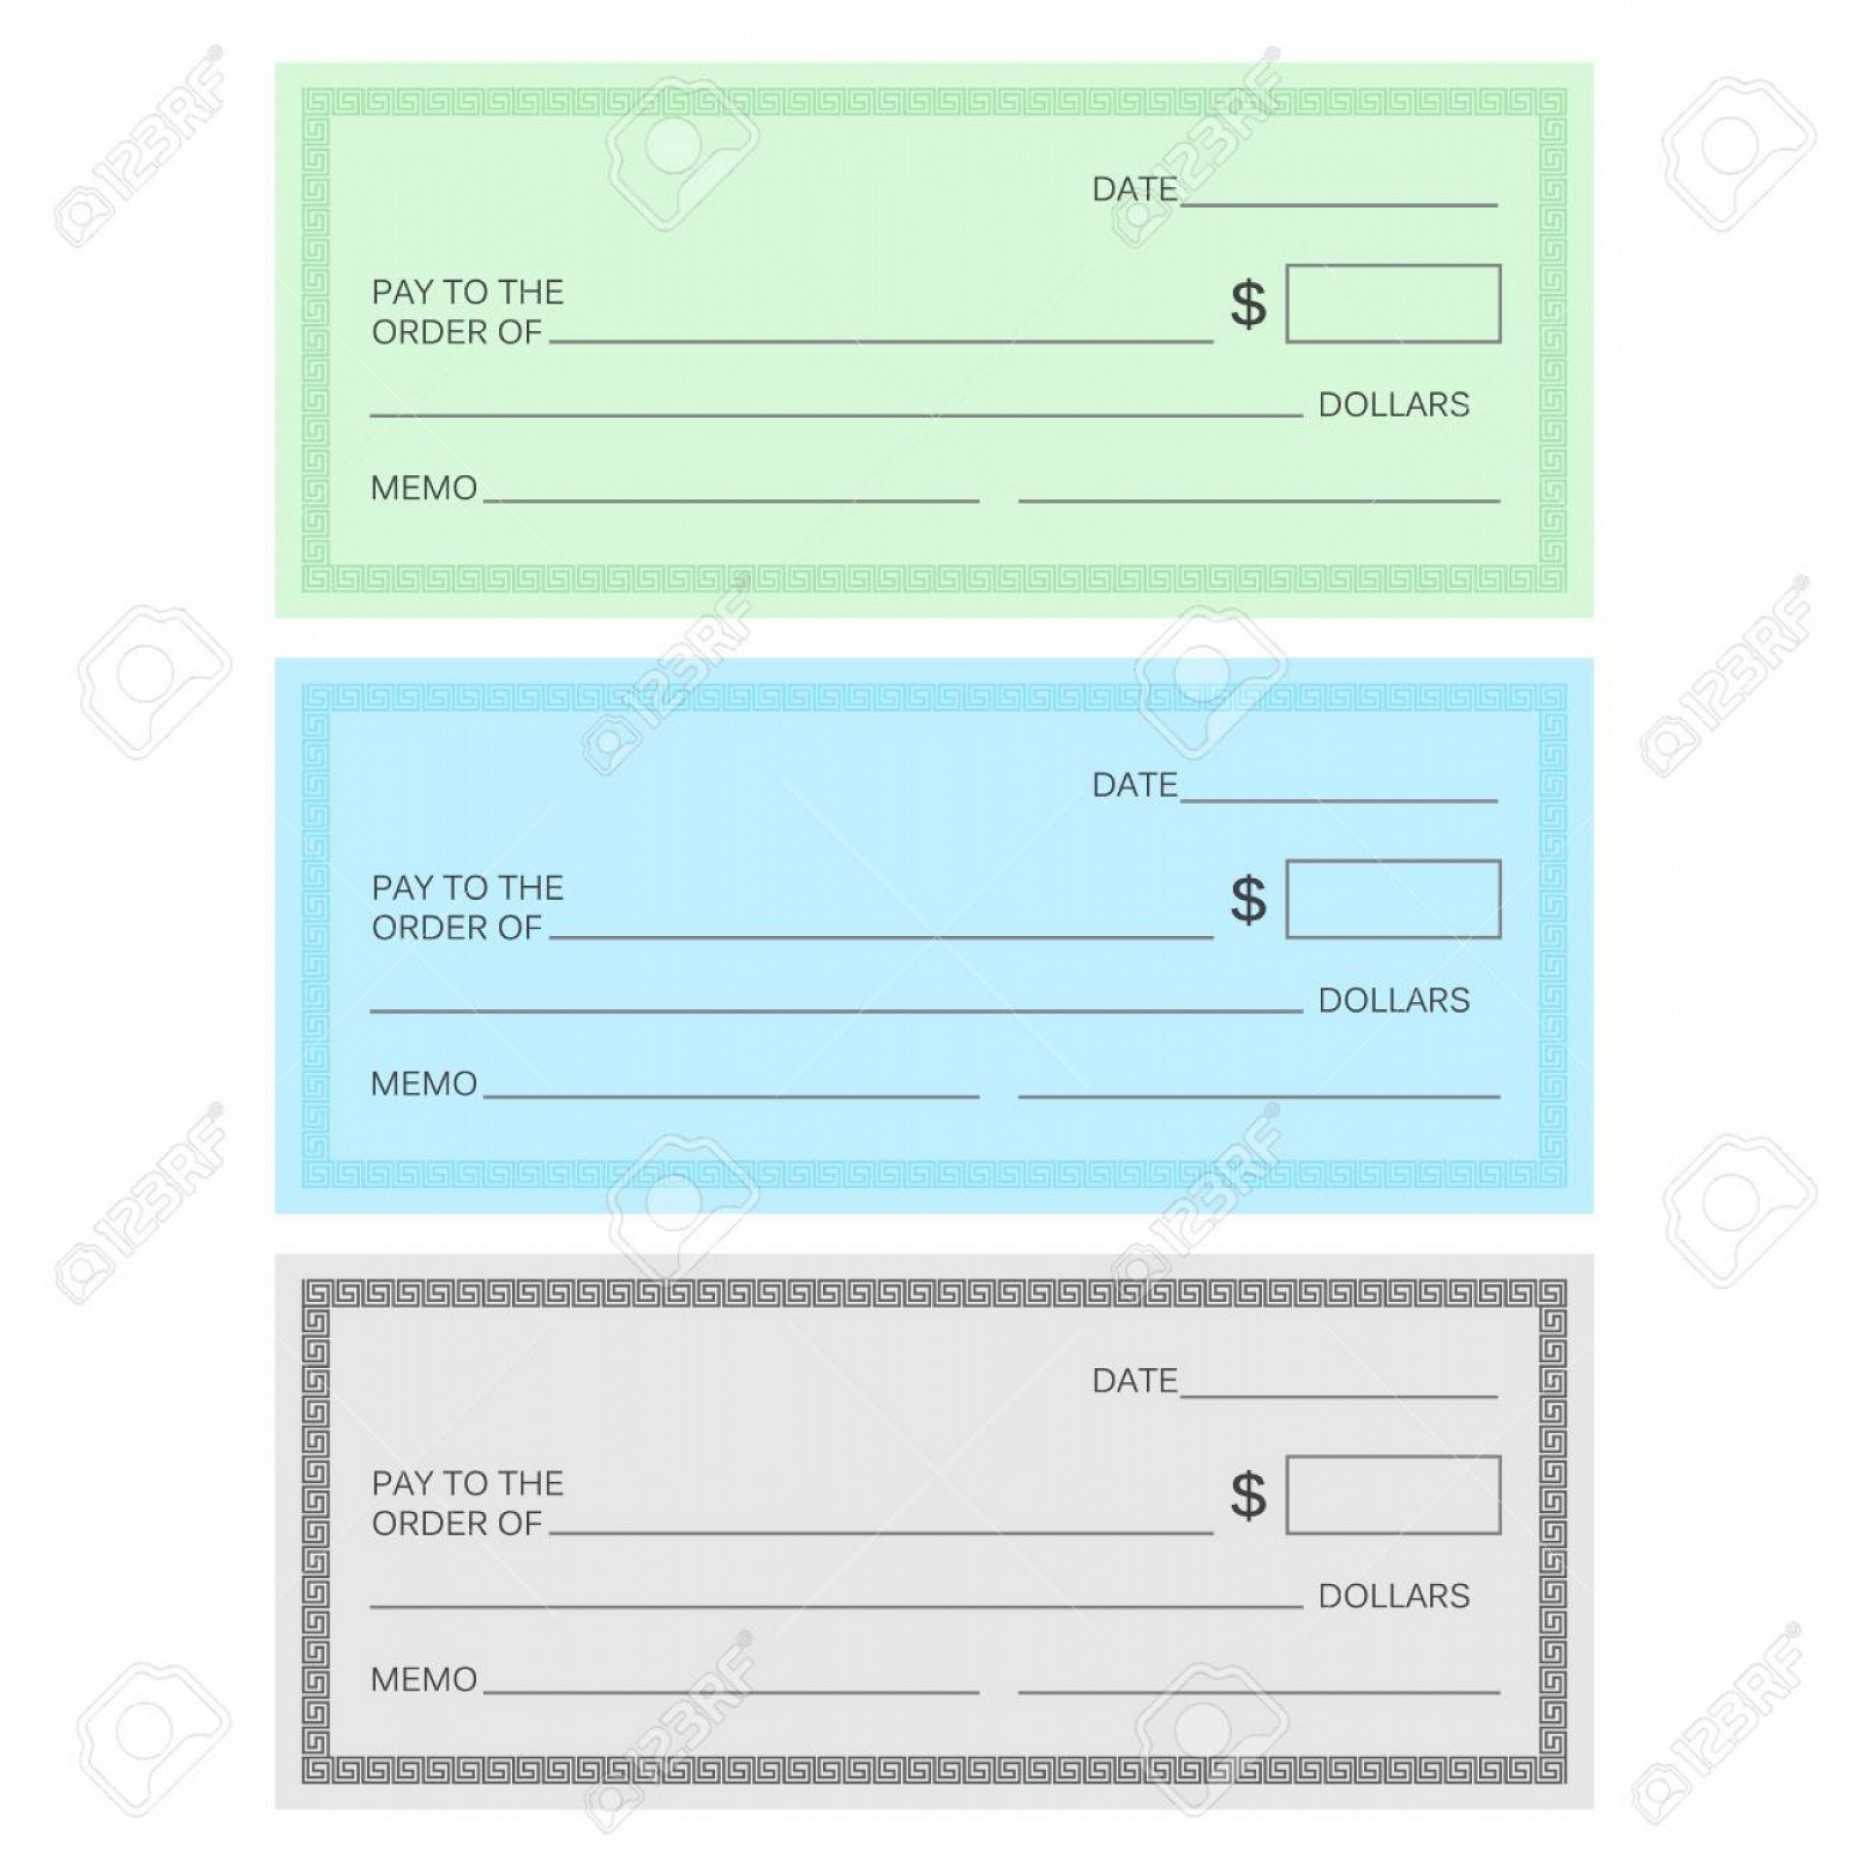 031664C Presentation Cheque Template | Wiring Resources Intended For Blank Cheque Template Uk